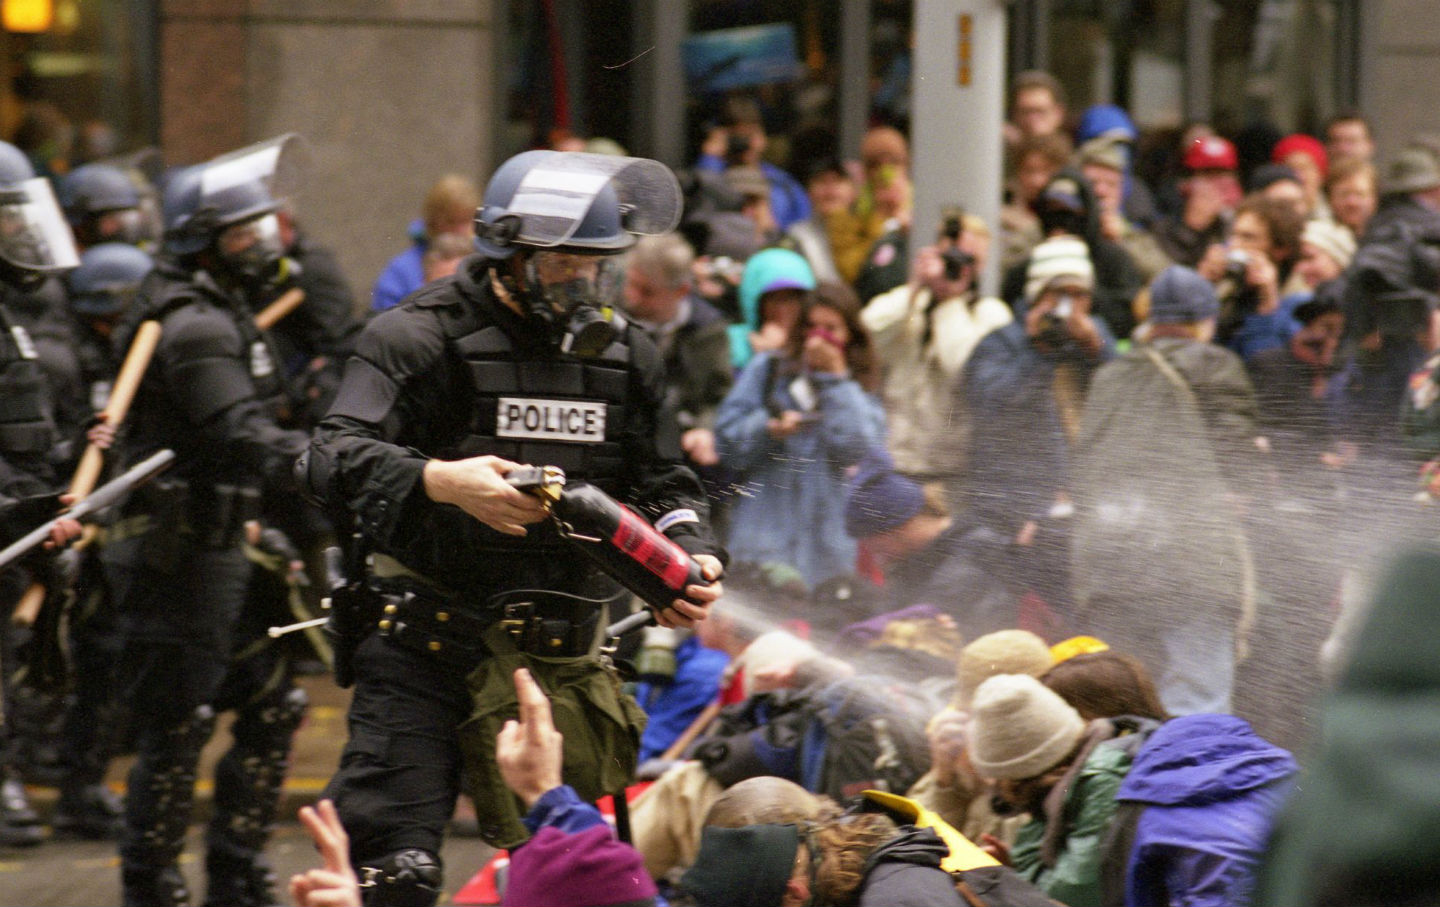 November 30, 1999: World Trade Organization Meeting in Seattle Disrupted By Anti-Globalization Protests